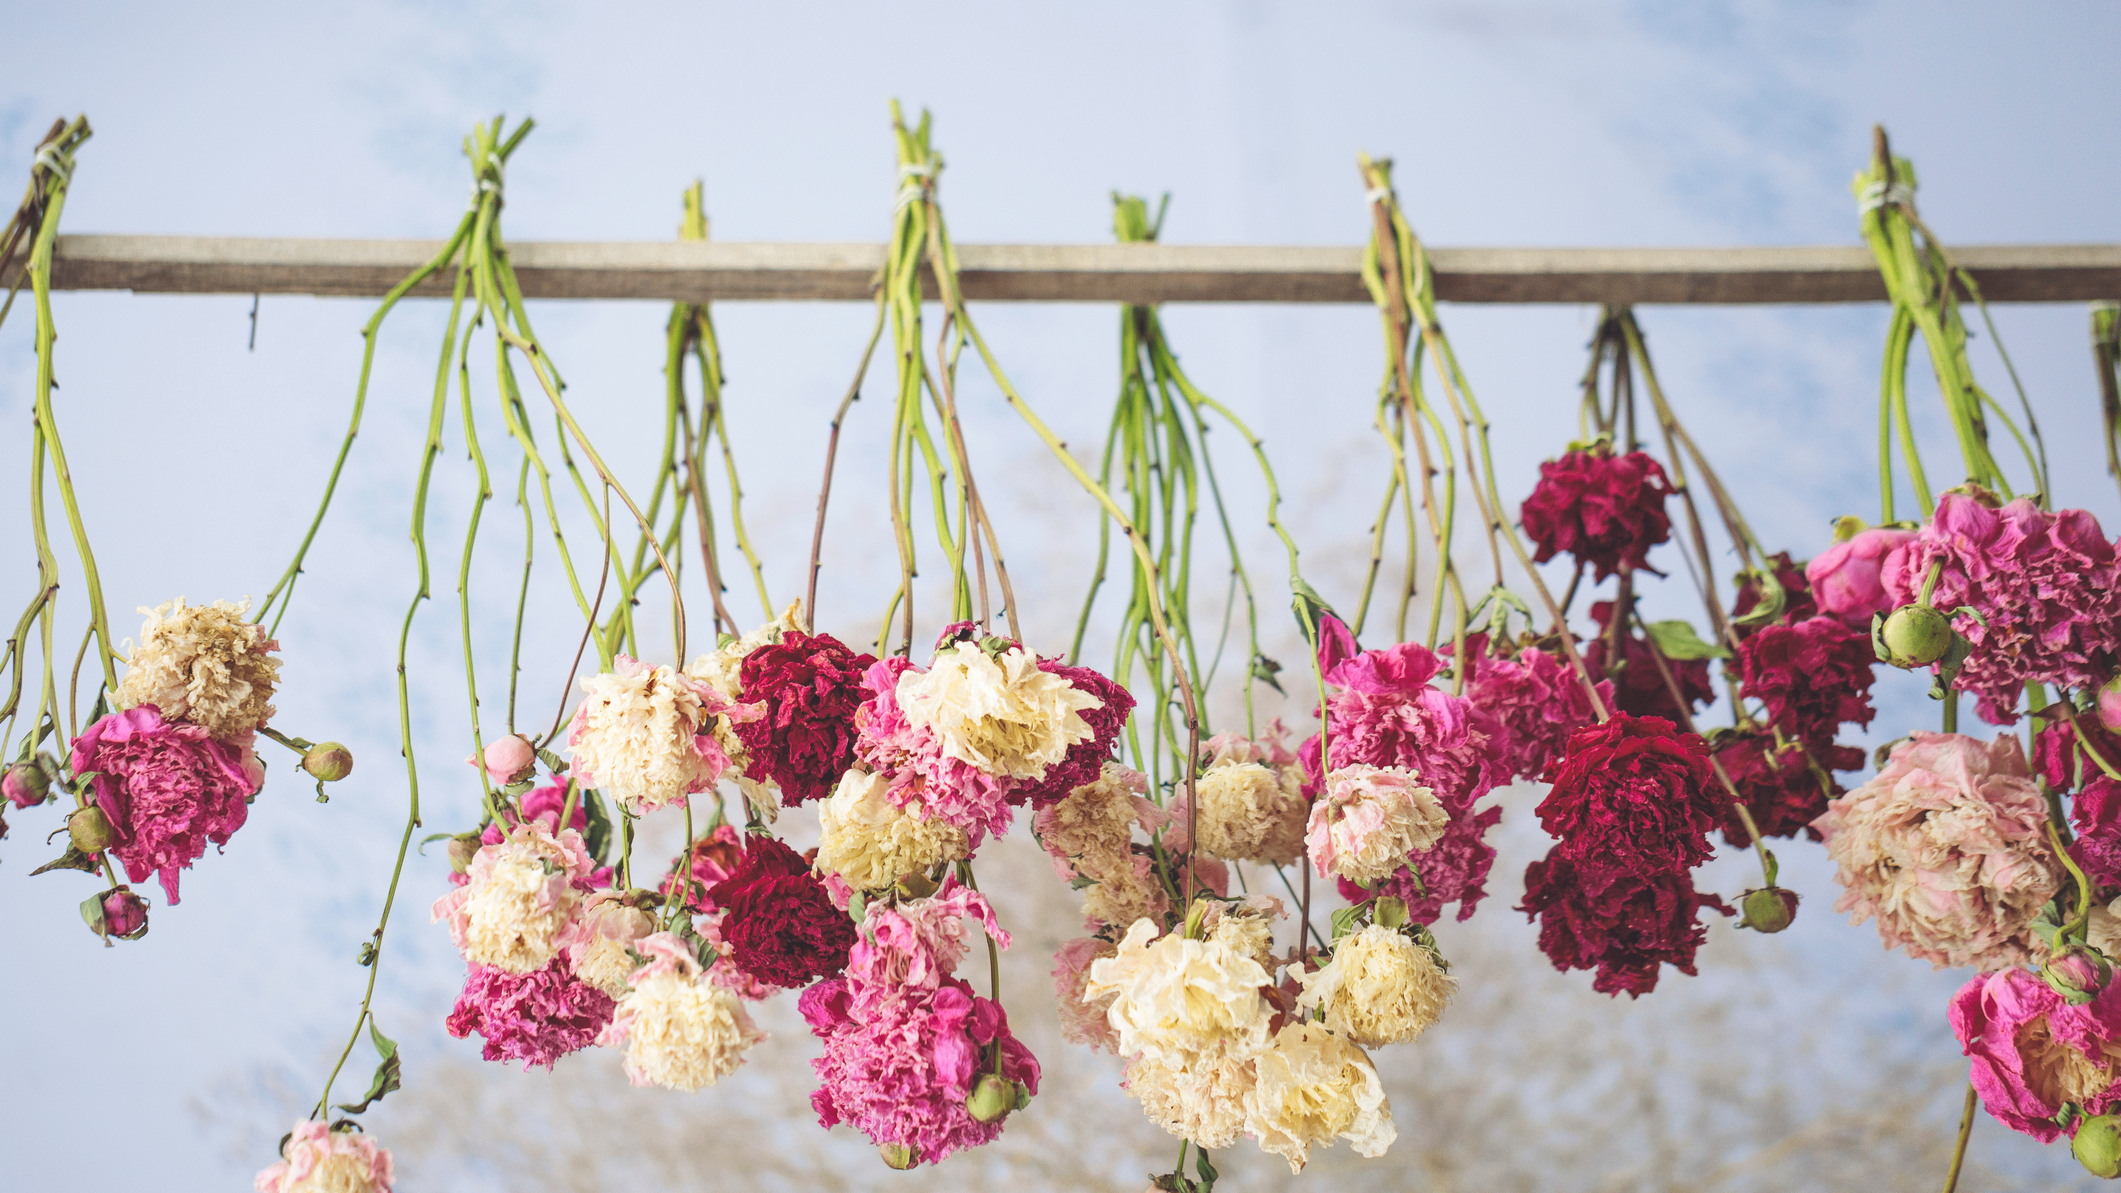 How to Dry Flowers - Easy Flower Drying Tips